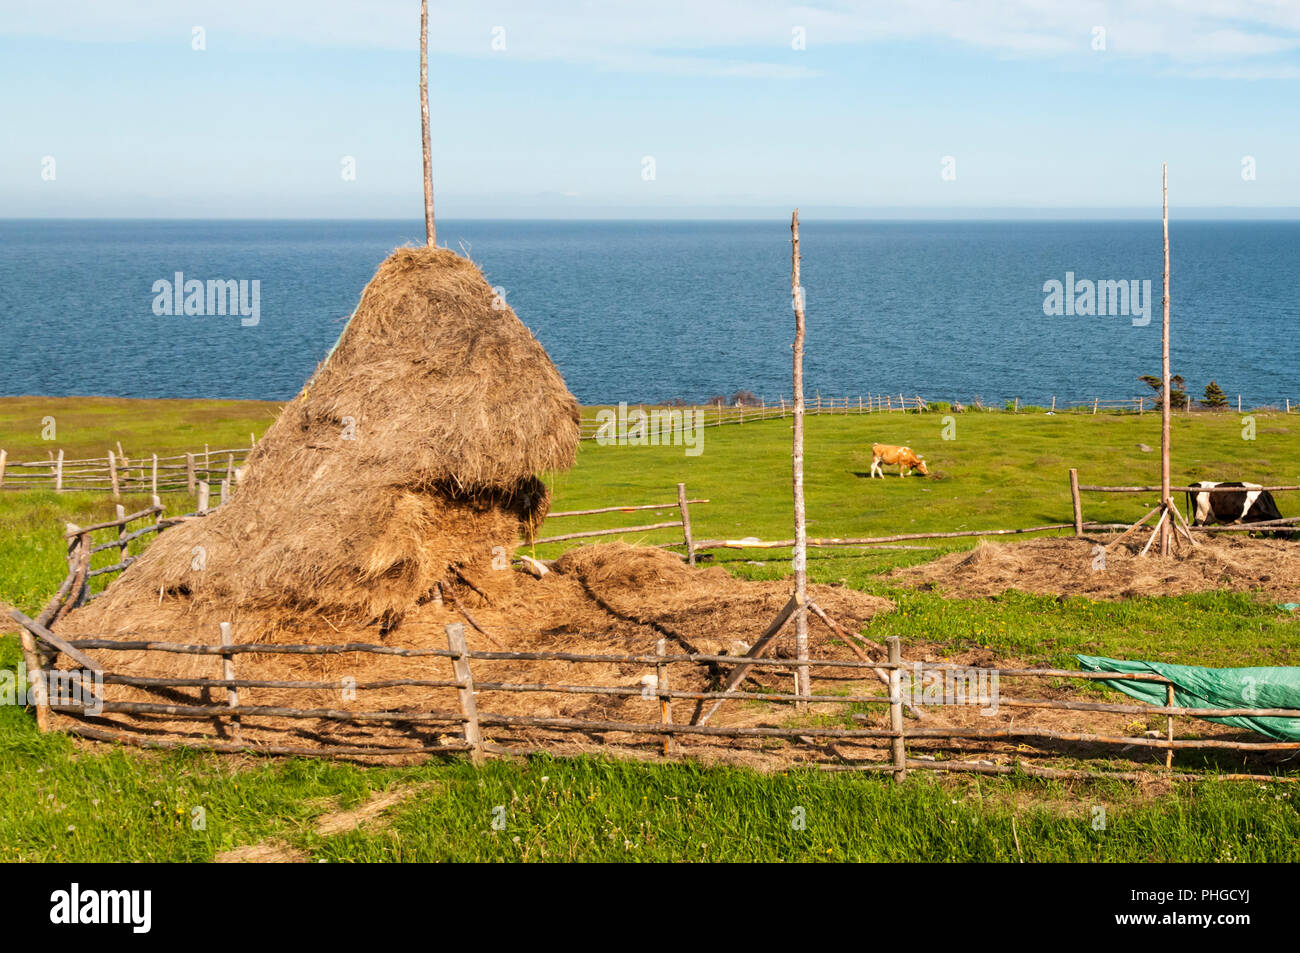 Traditional style of haystack at a smallholding on the coast of the Port au Port Peninsula, Newfoundland. Stock Photo